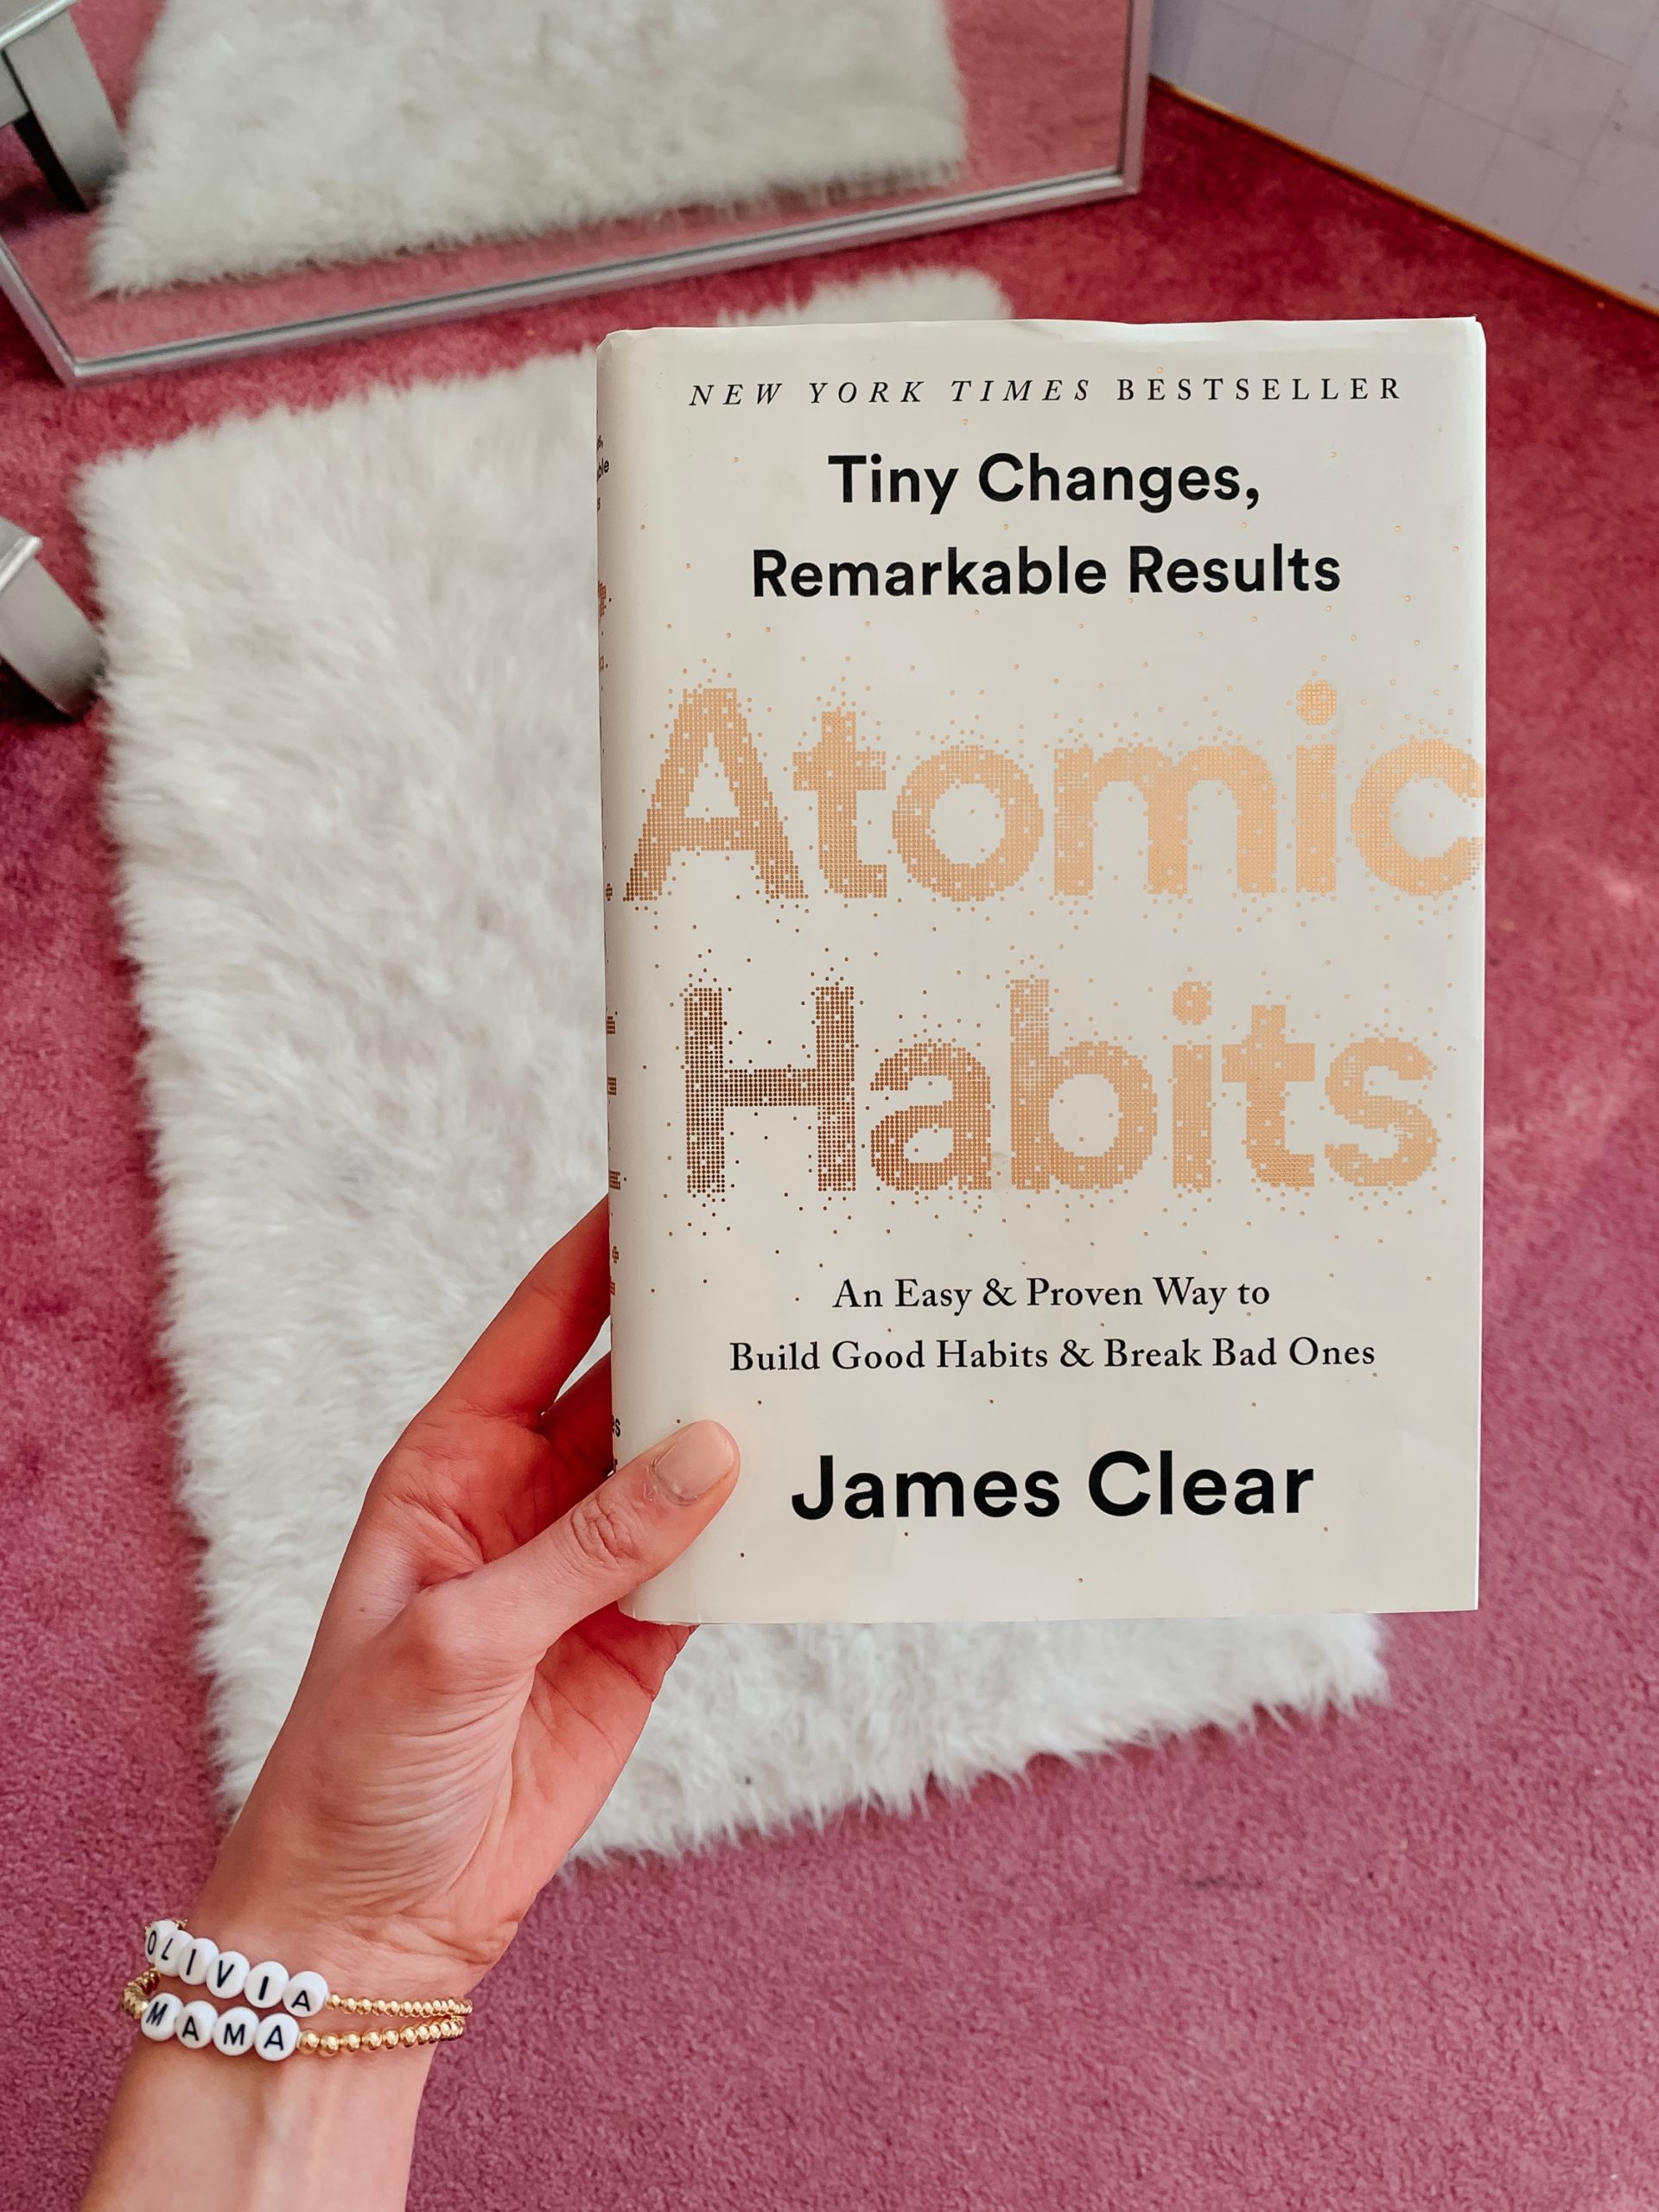 ATOMIC HABITS book by James Clear